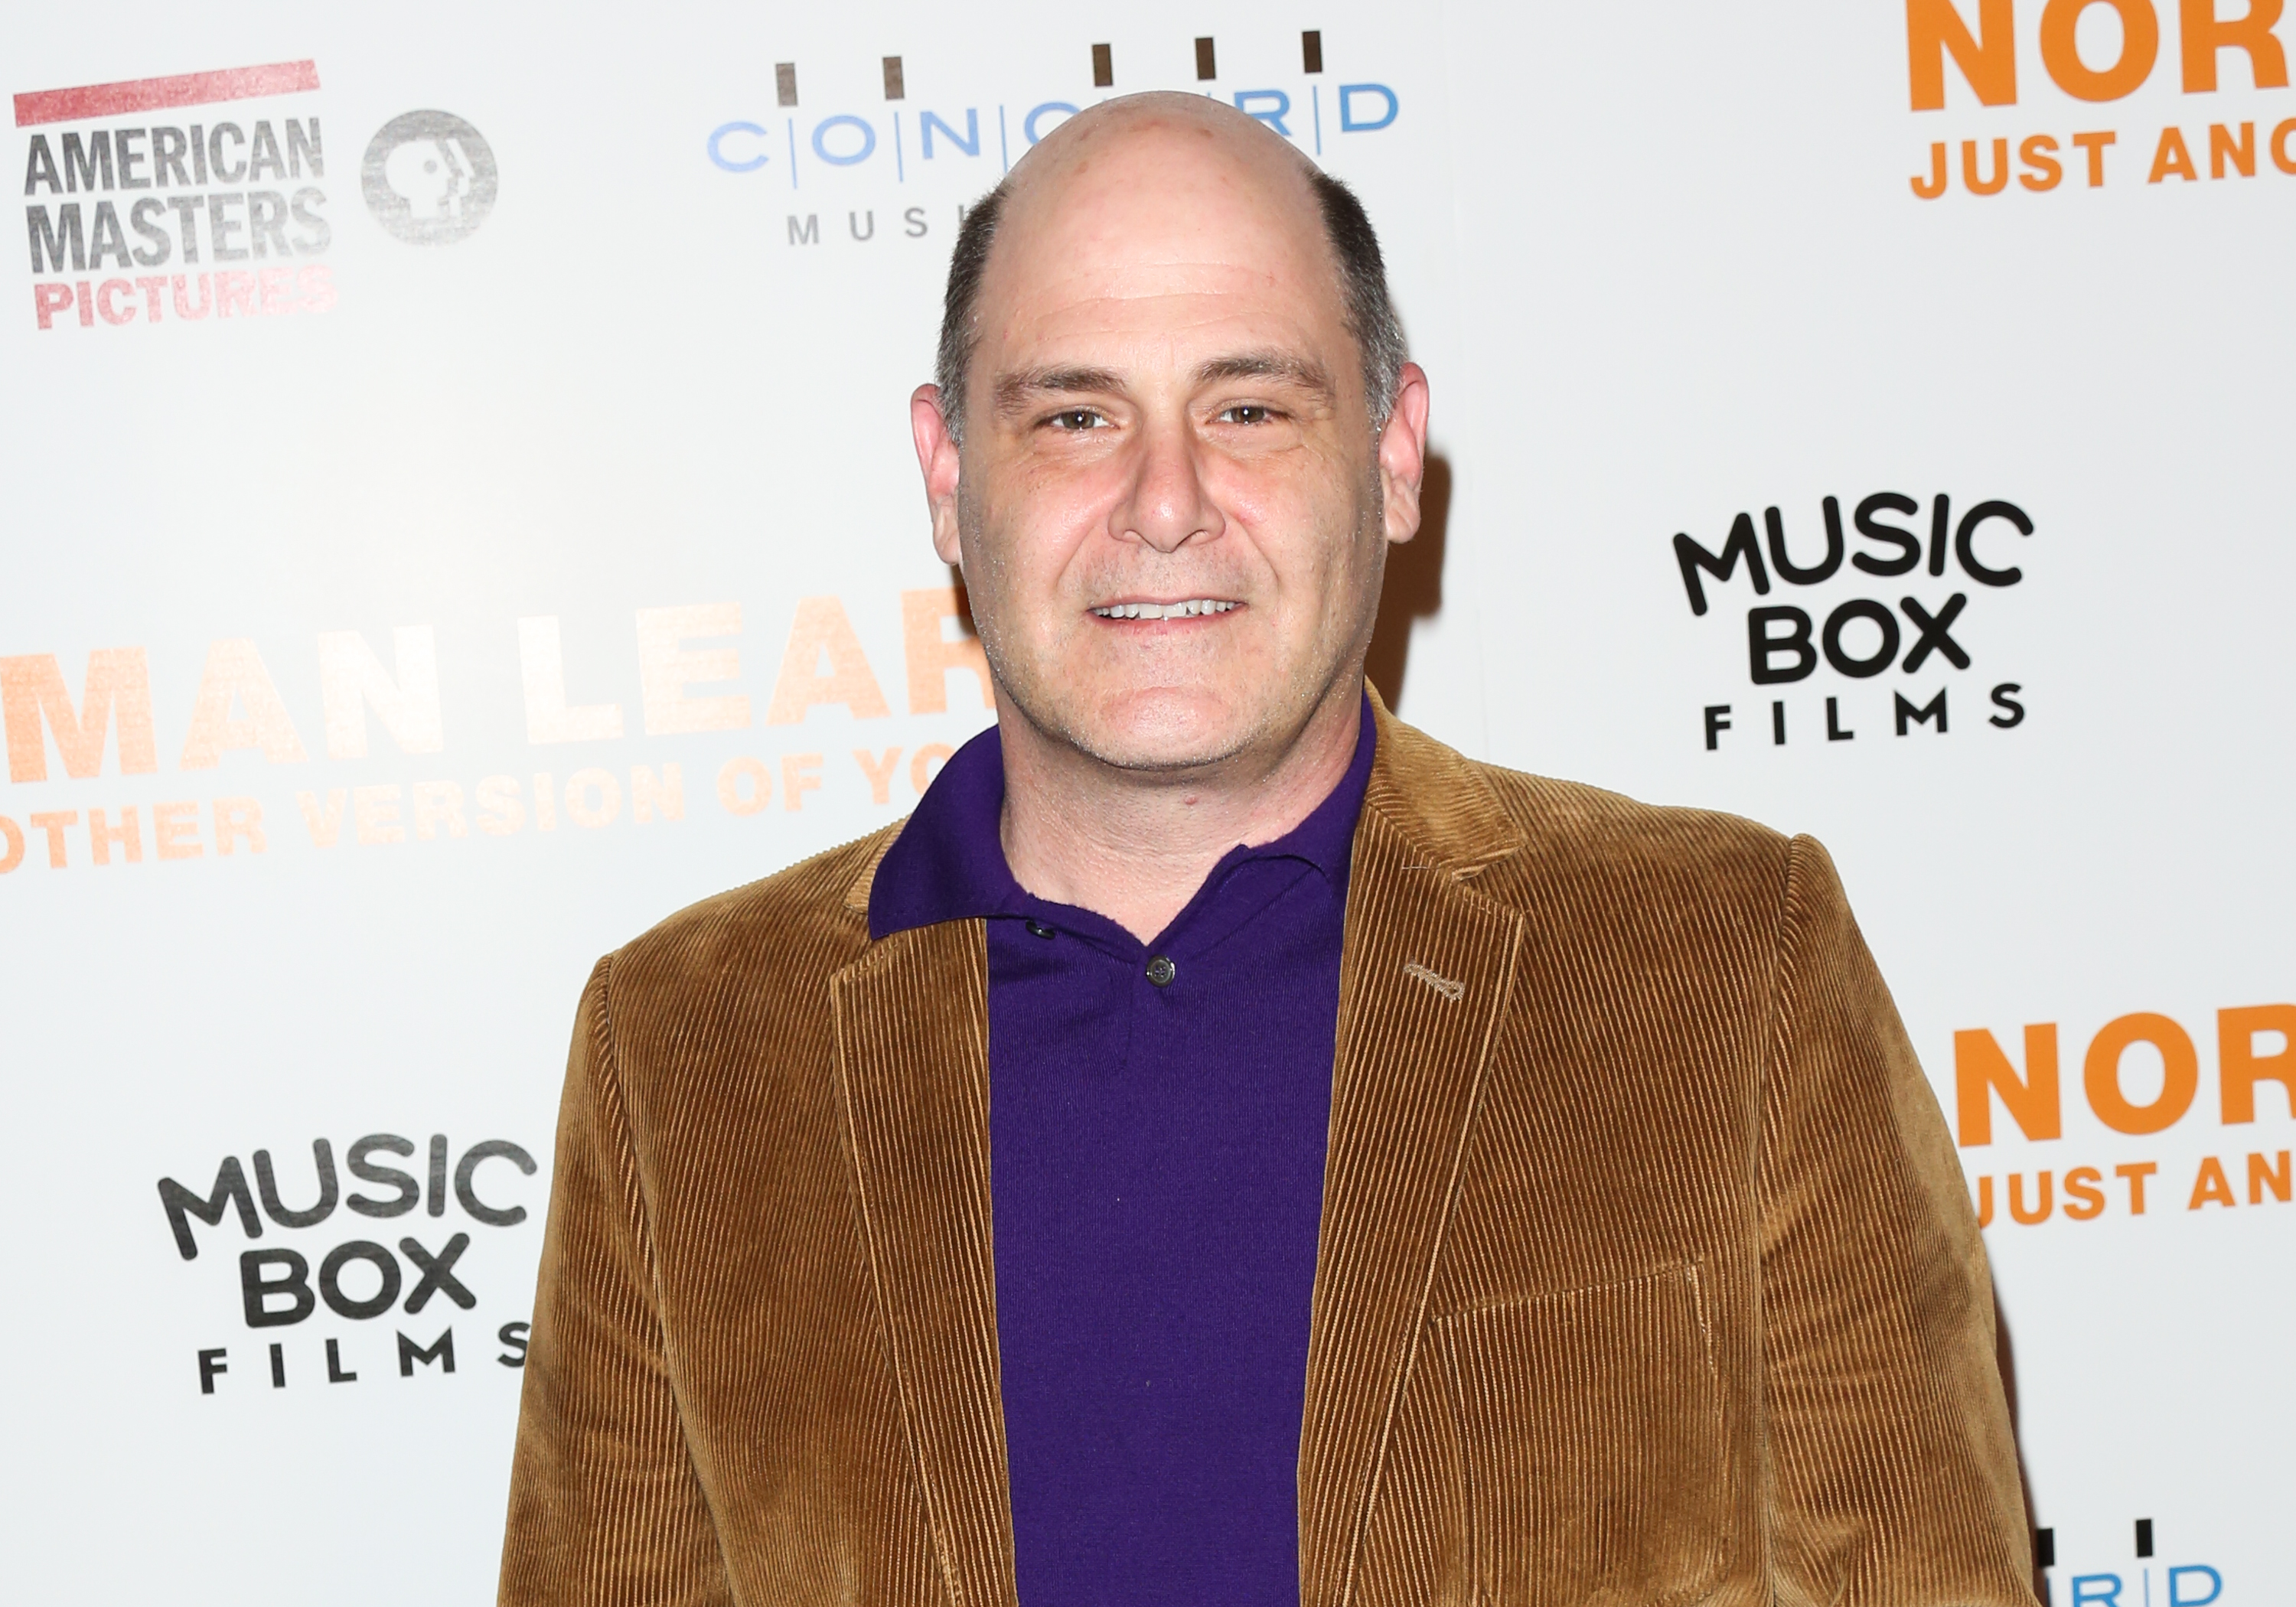 Writer Matthew Weiner attends the premiere "Norman Lear: Just Another Version Of You" at The WGA Theater on July 14, 2016 in Beverly Hills, California. (Paul Archuleta&mdash;FilmMagic/Getty Images)